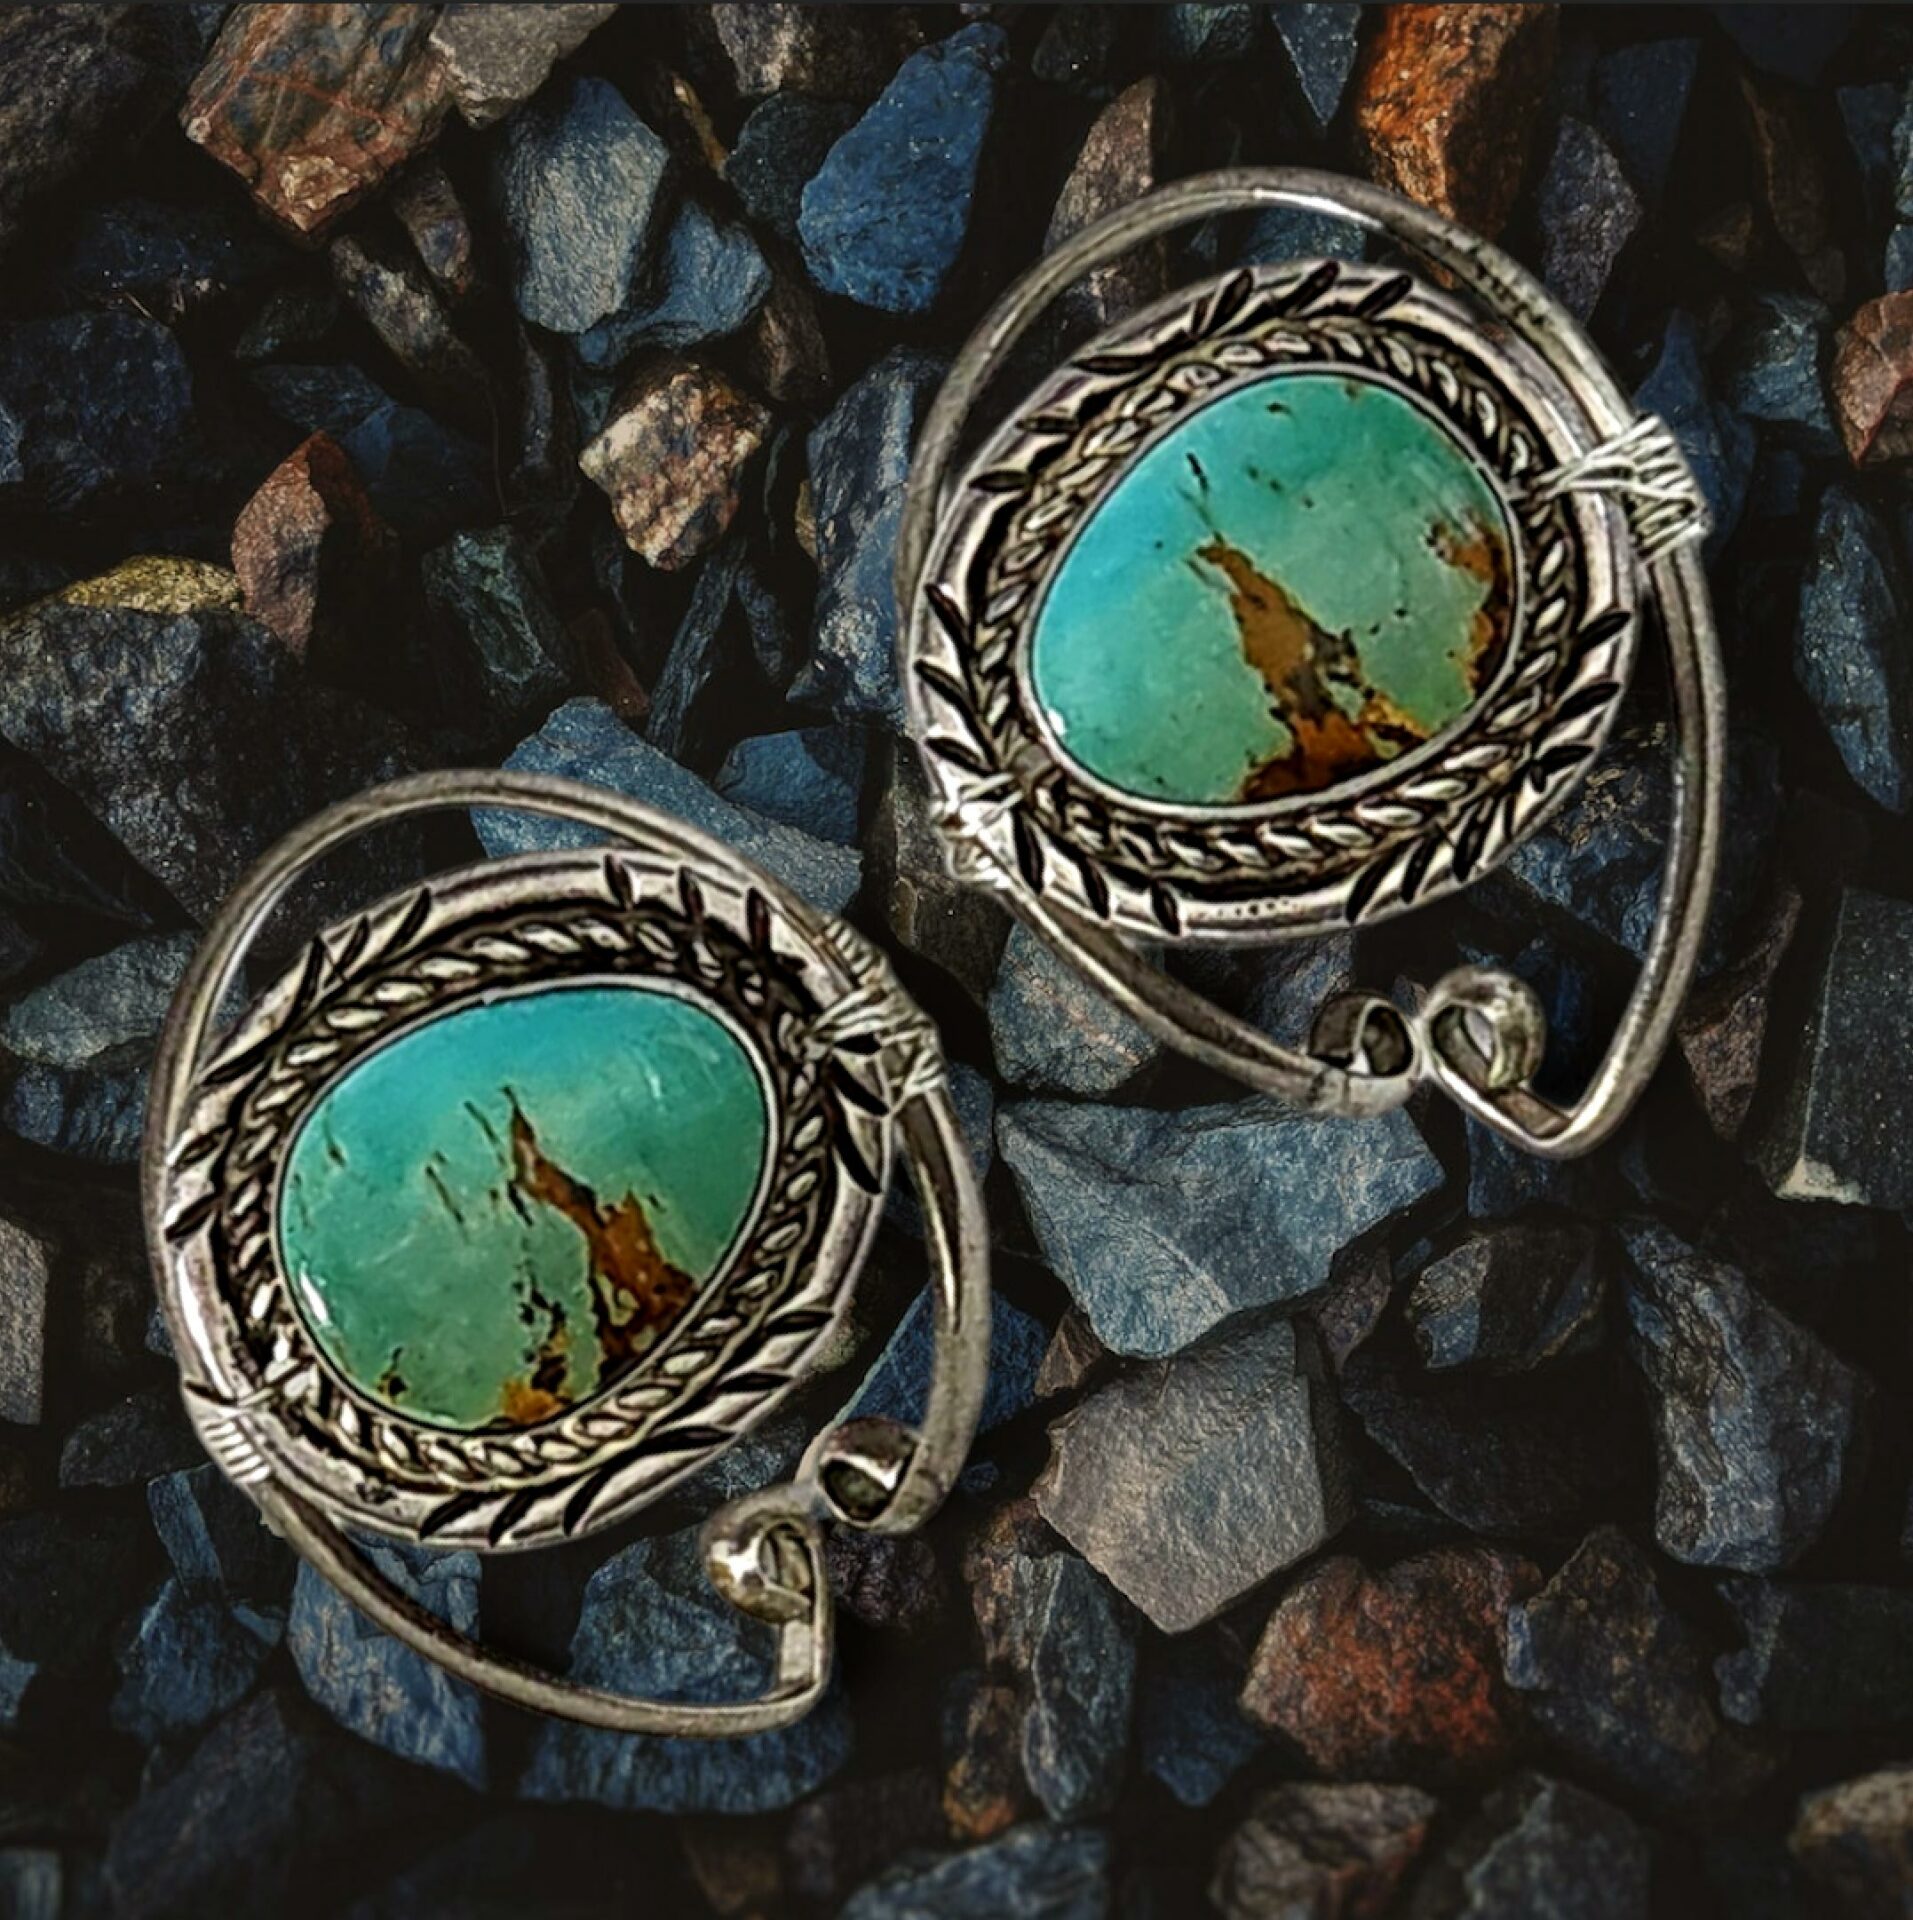 A pair of silver earrings with turquoise stones.